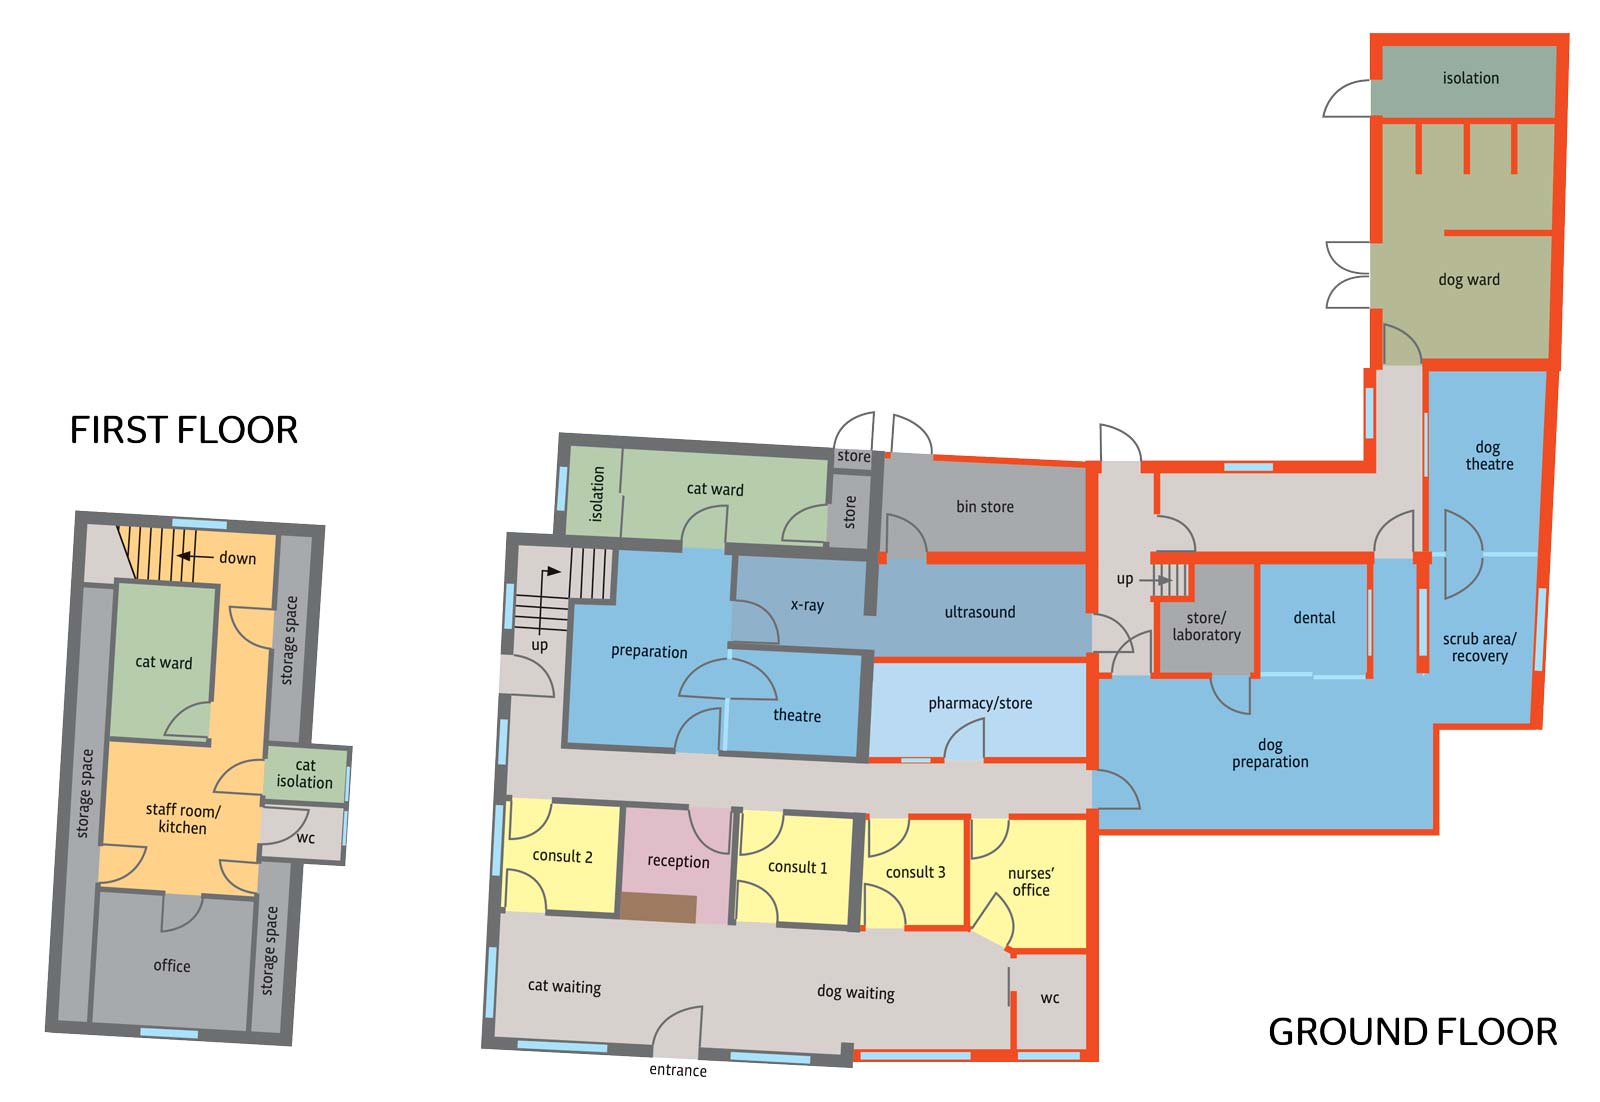 Floor plans of Henlow Veterinary Centre showing the expansion from the building work taking place (red area) to be completed in early 2021.